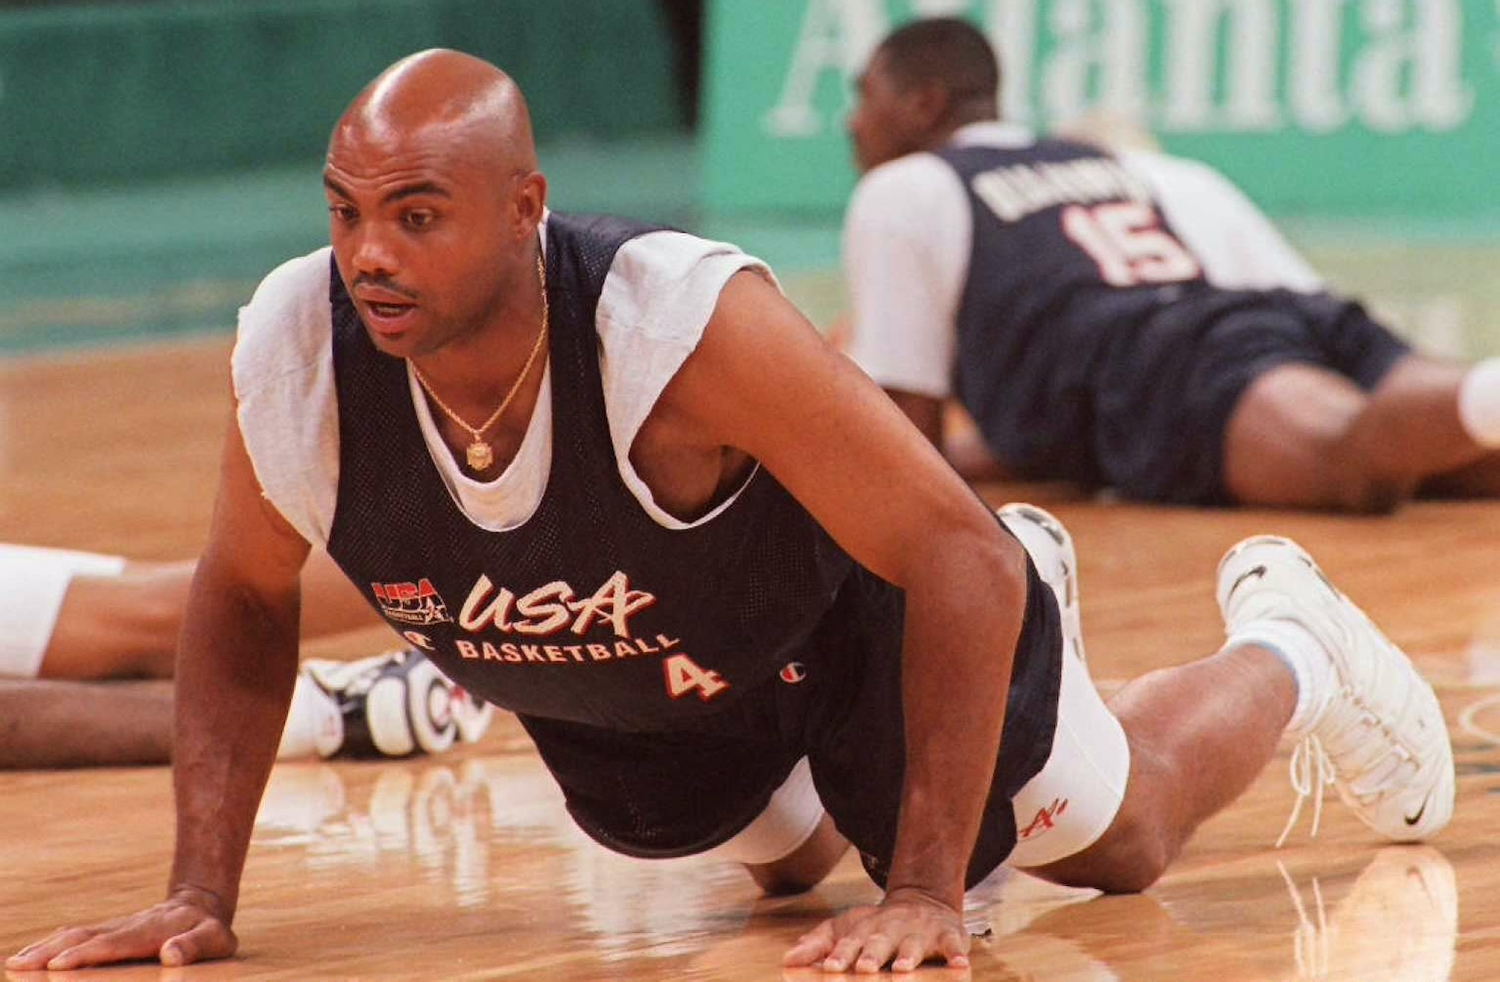 NBA star Charles Barkley works out with Team USA.